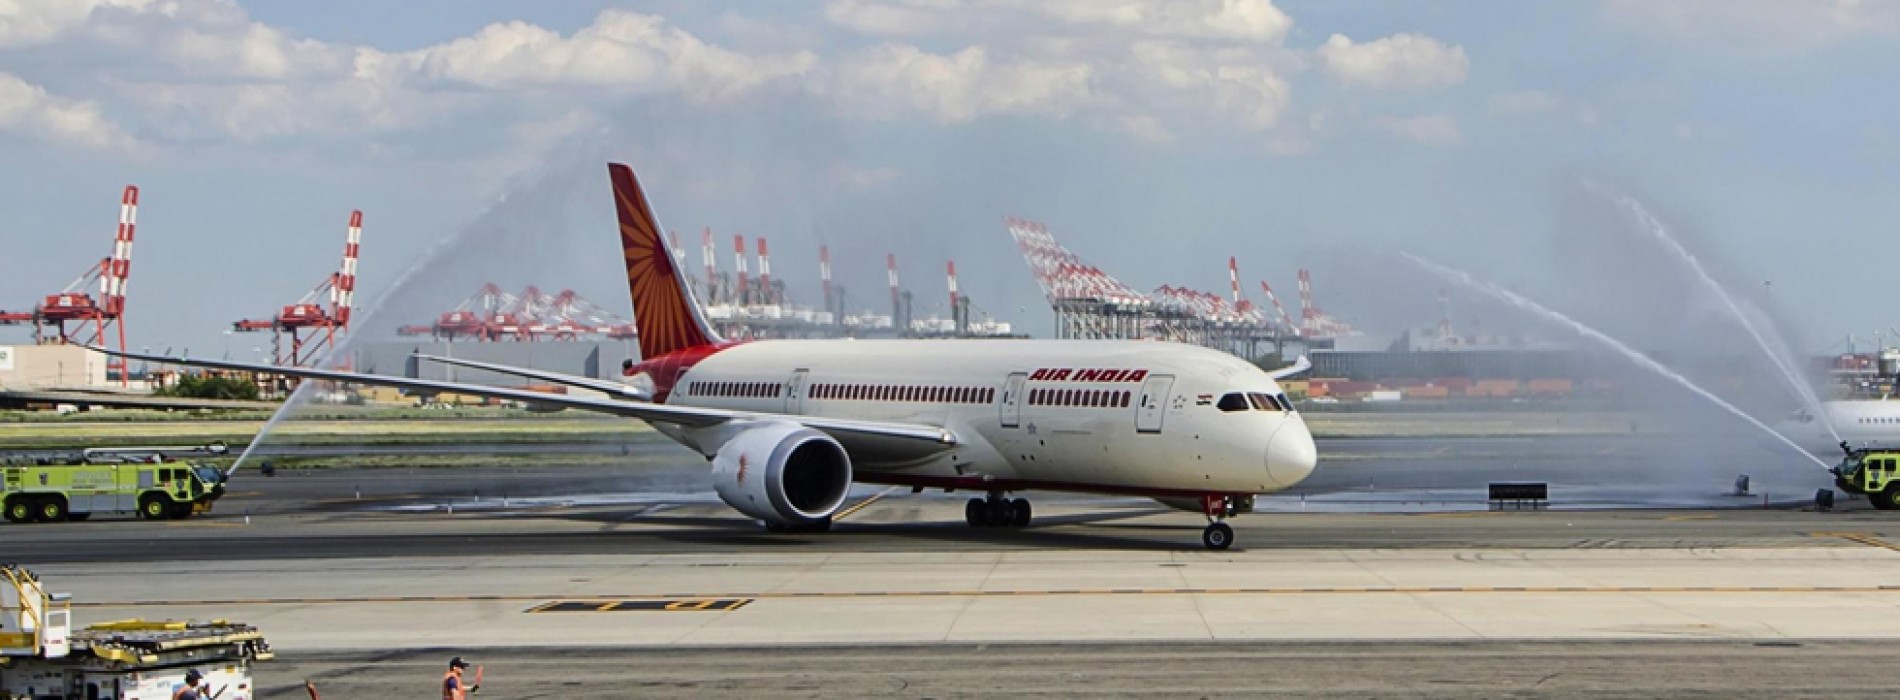 DGCA may ground 130 Air India pilots for skipping mandatory alcohol test